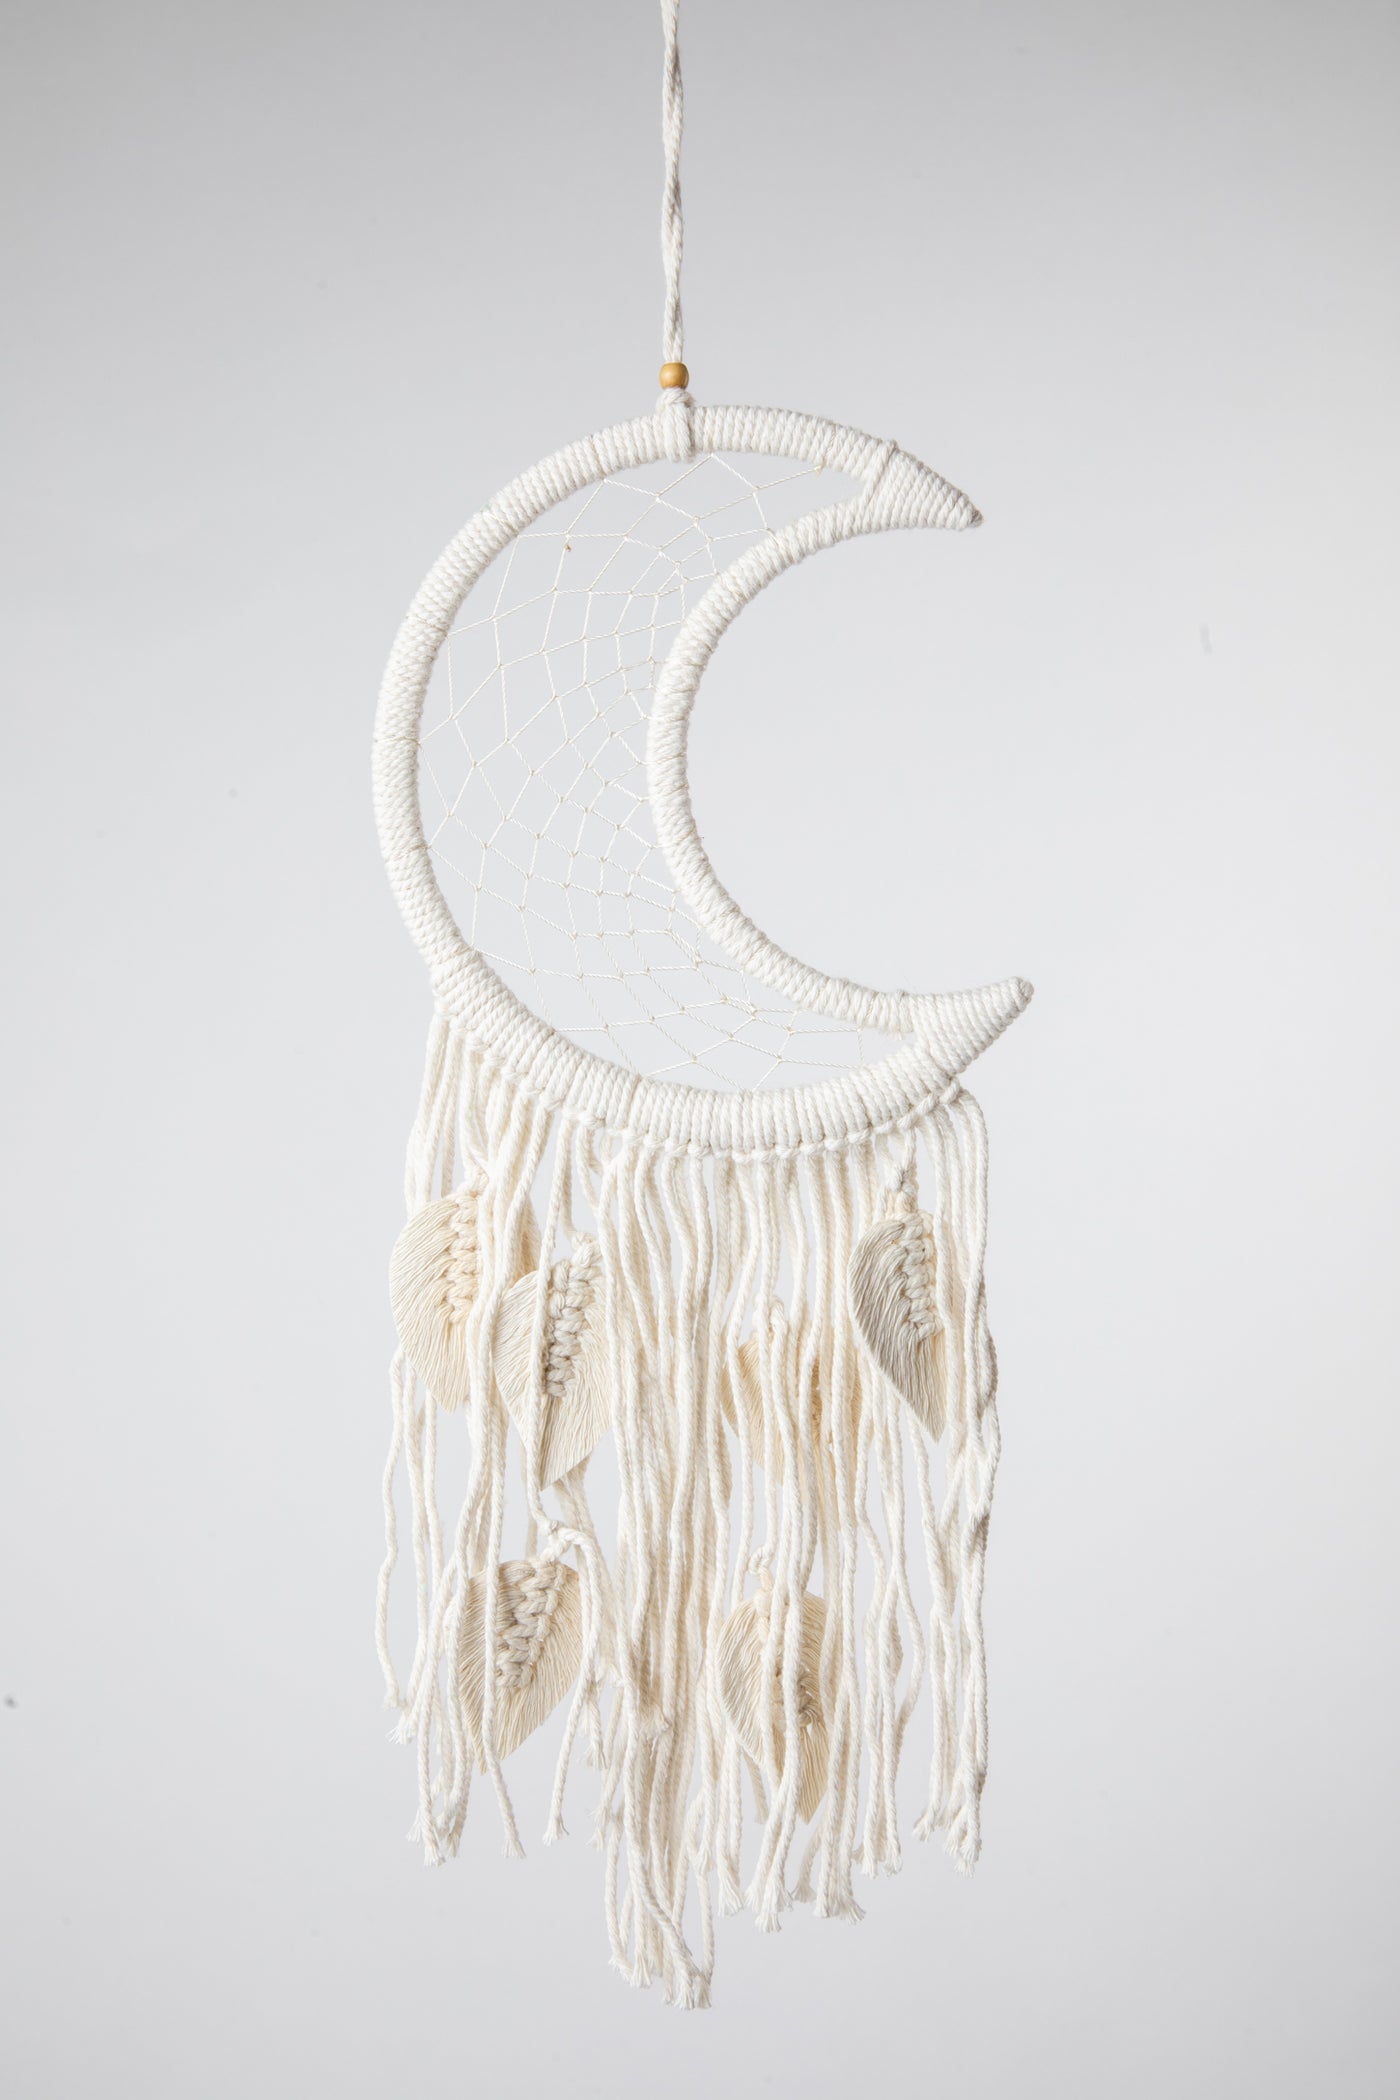 Crescent Moon Woven Wall Hanging